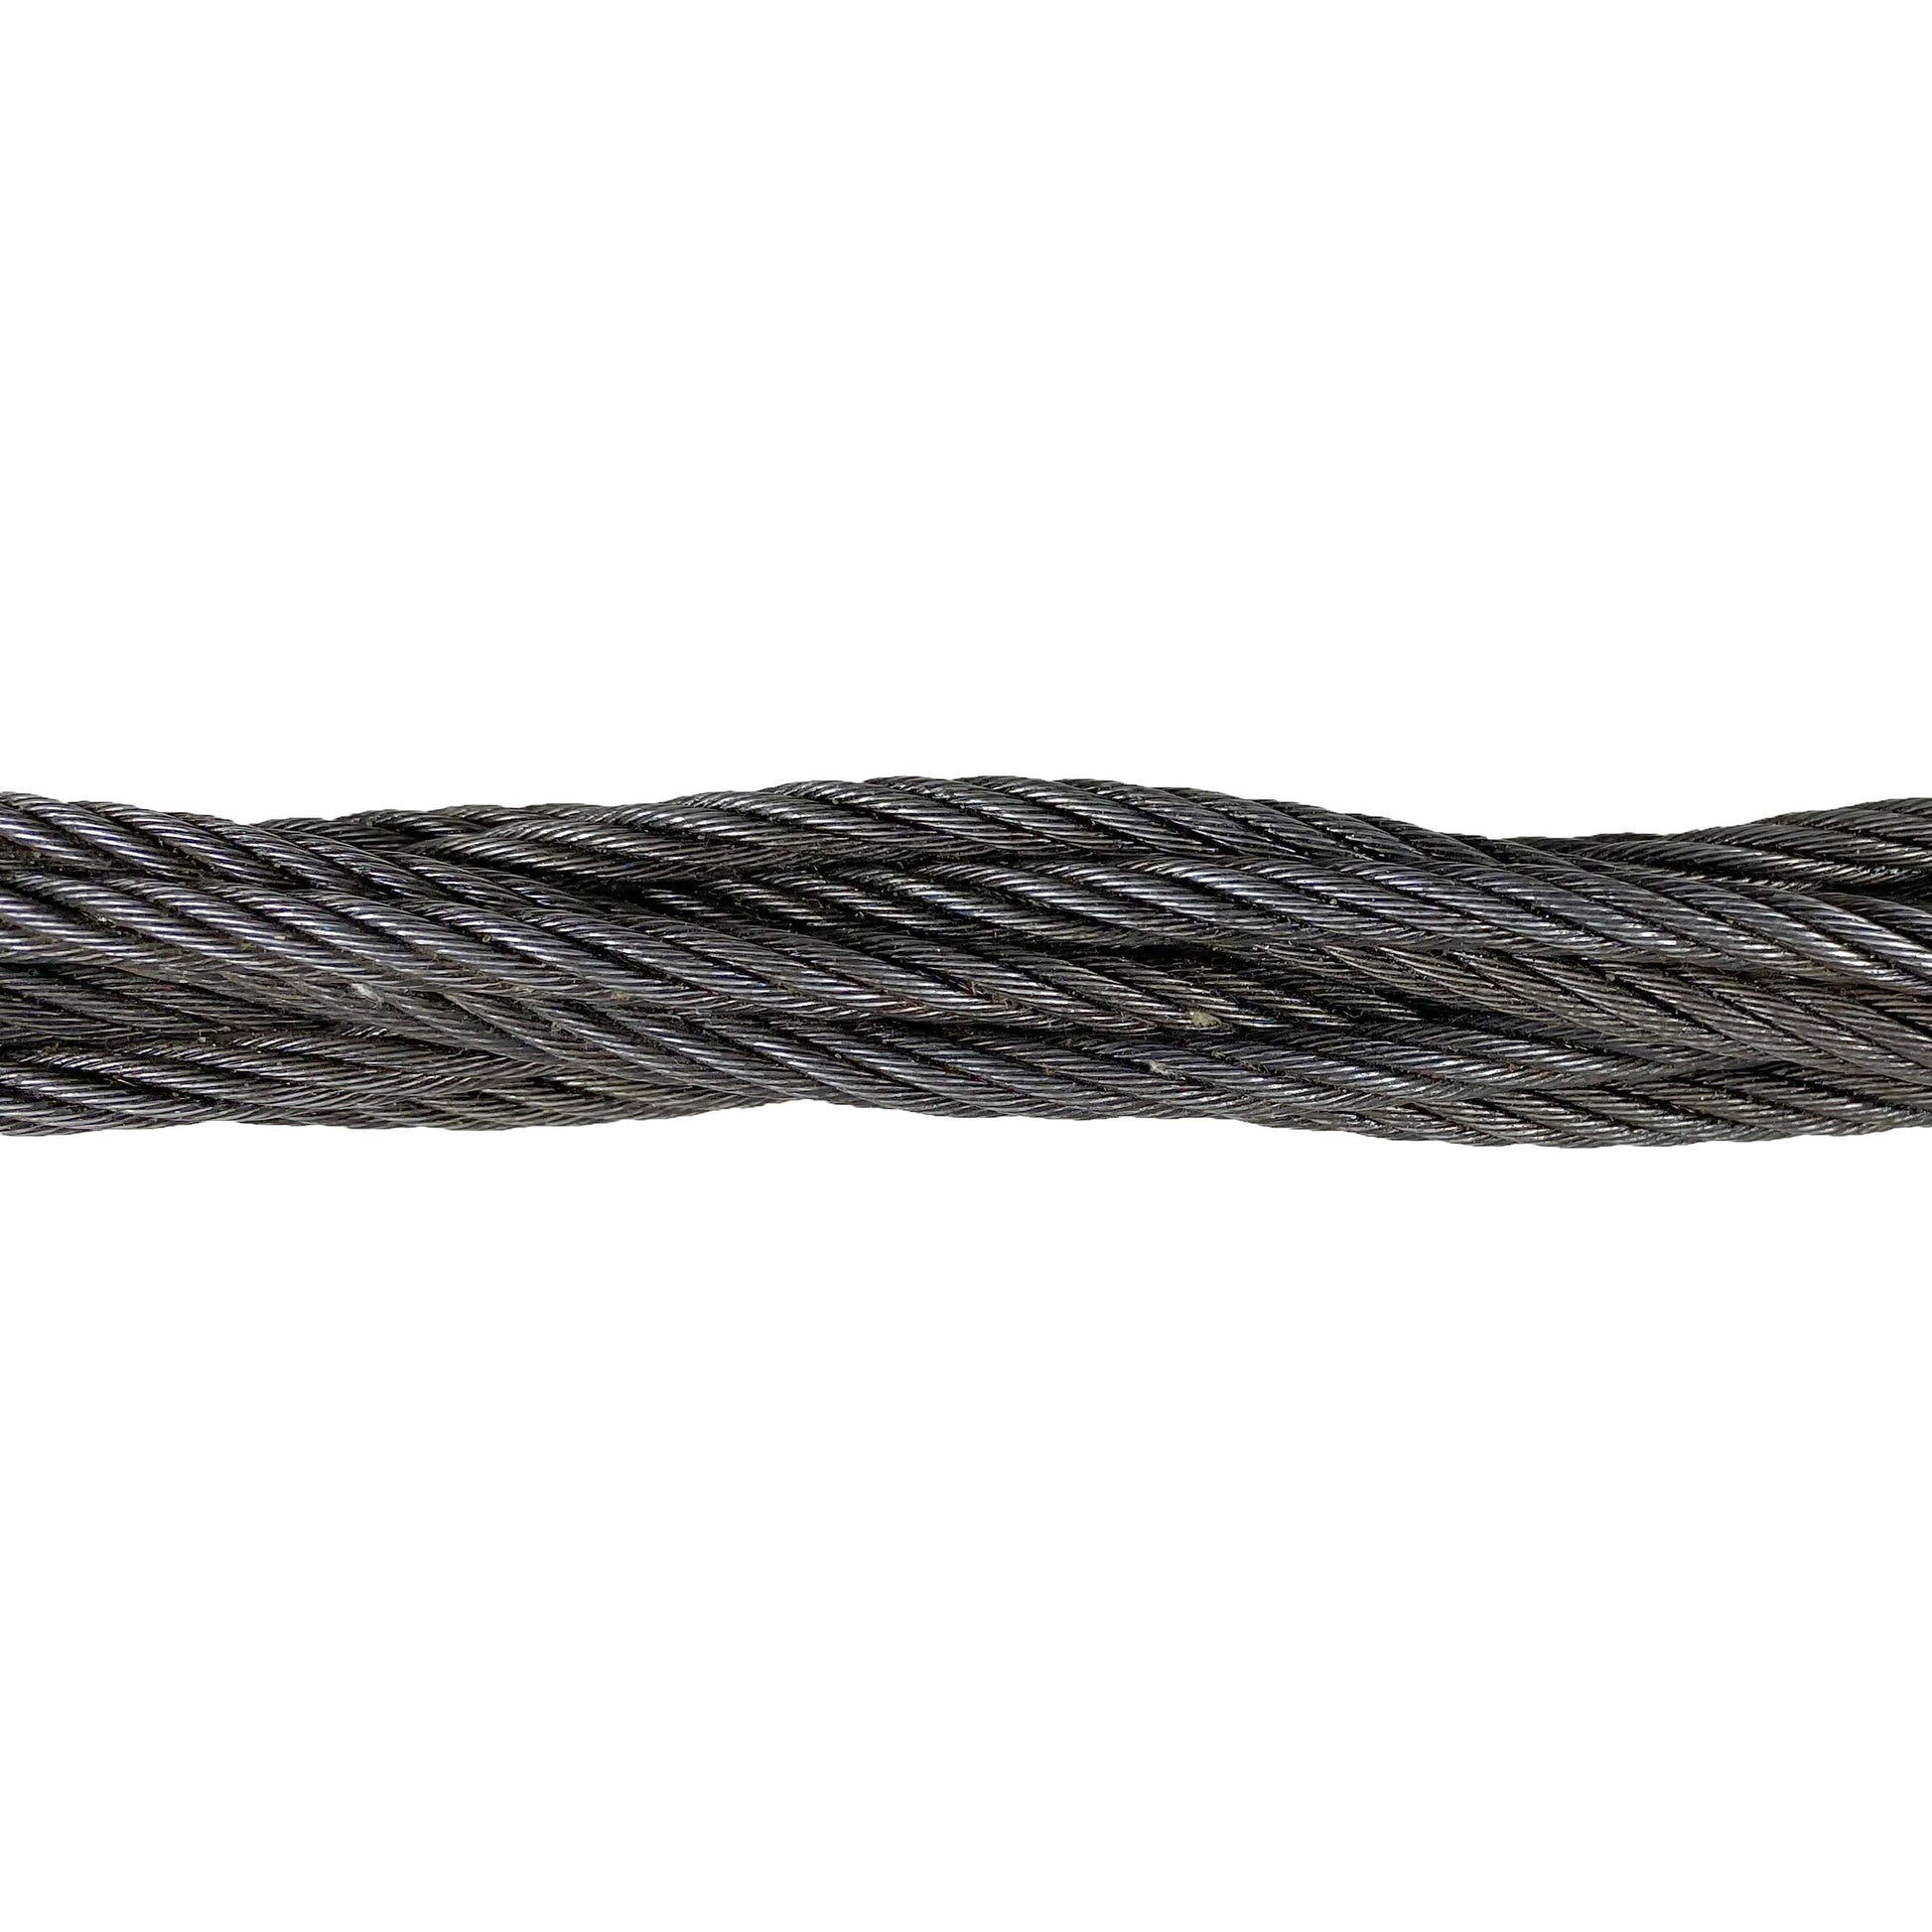 516 inch x 5 foot Nine Part Braided Wire Rope Sling image 3 of 3